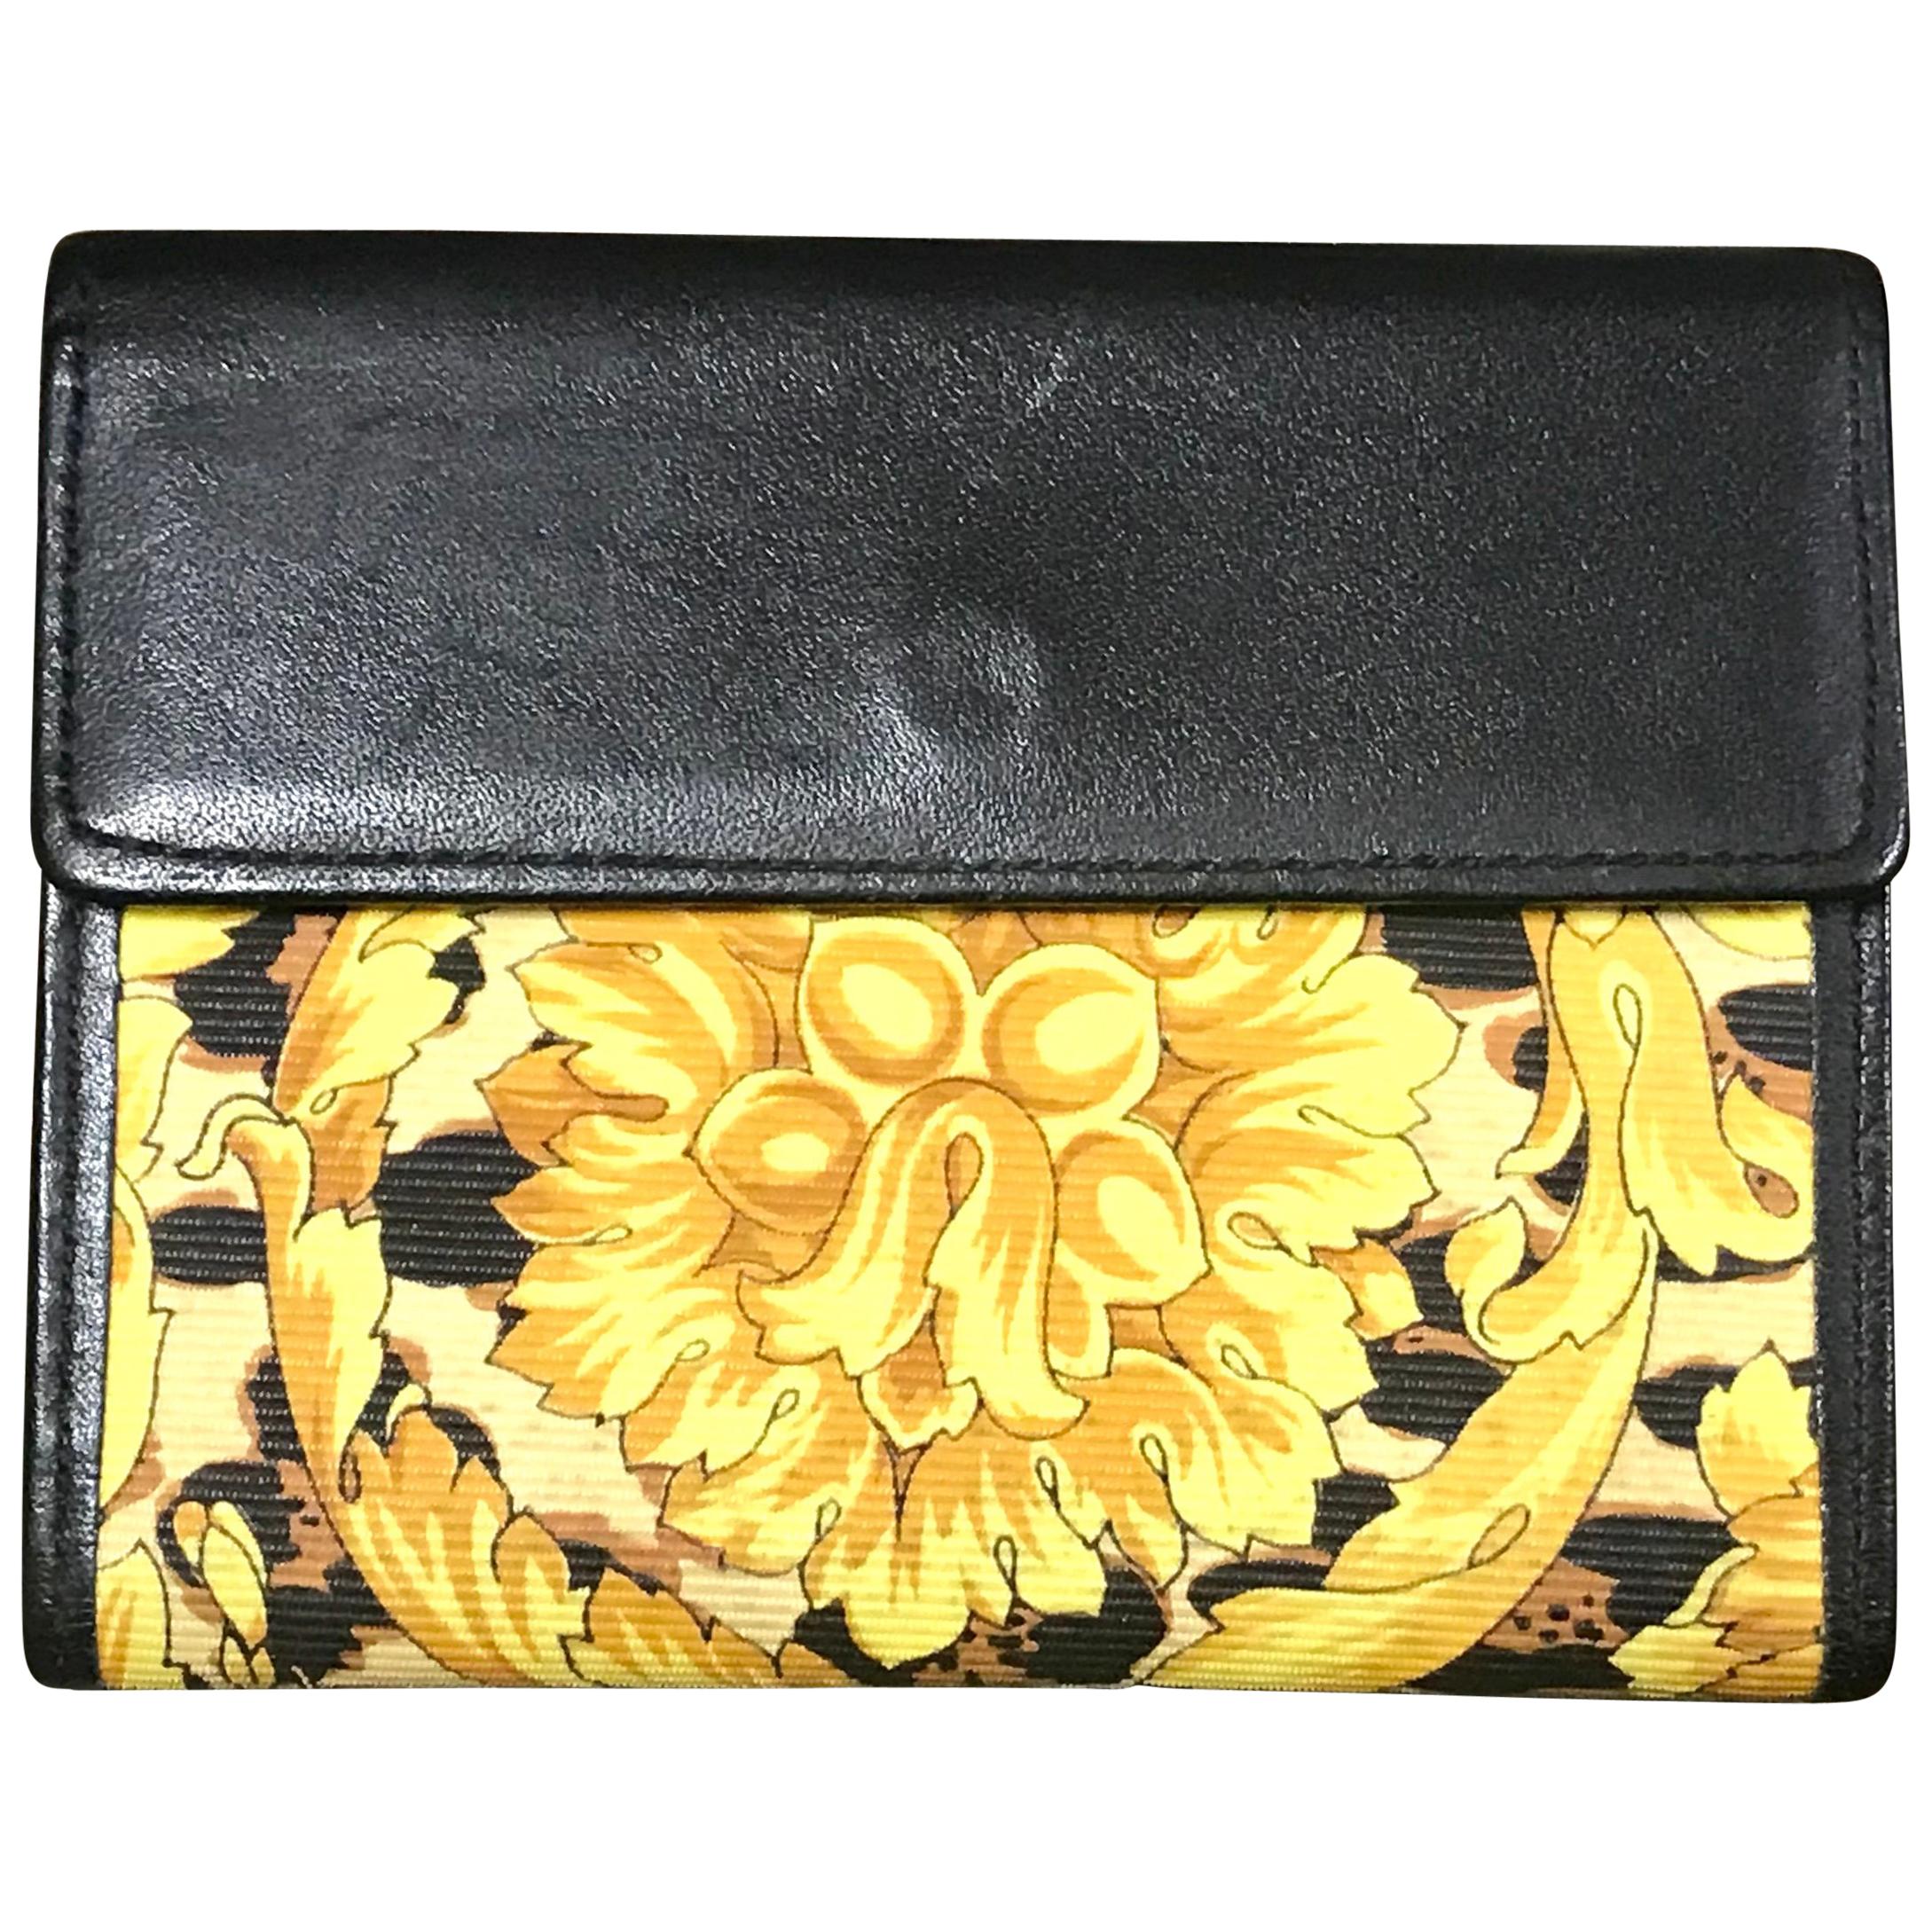 Gianni Versace Vintage black card case wallet with yellow arabesque and leopard  For Sale